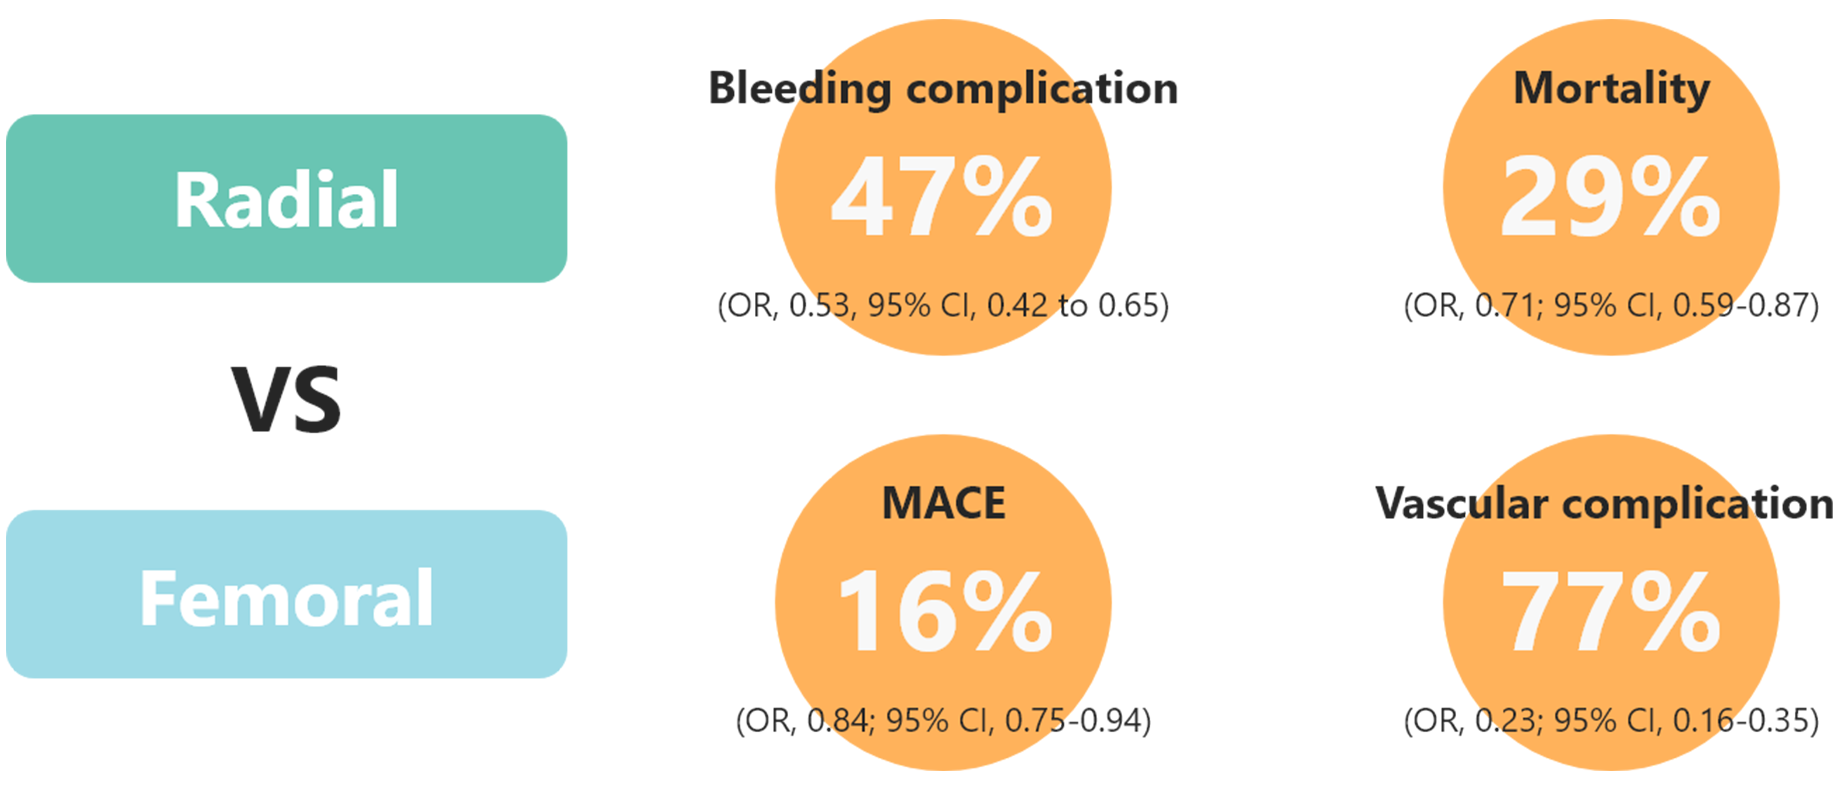 Bleeding complication by radial access vs. femoral access (image)